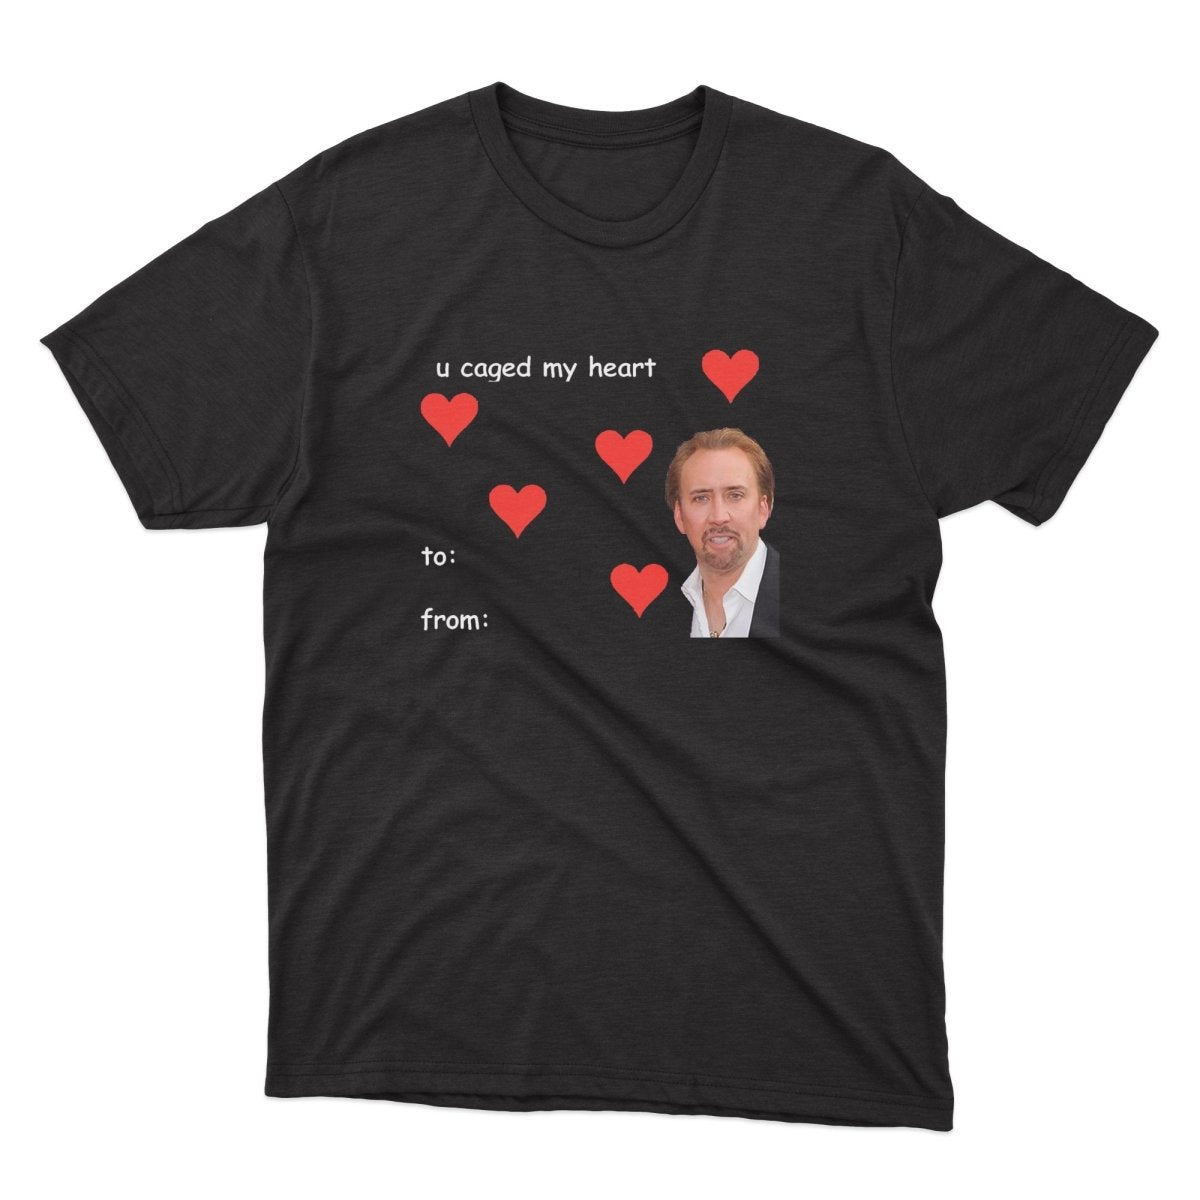 Nicolas Cage Caged My Heart Shirt - stickerbullNicolas Cage Caged My Heart ShirtShirtsPrintifystickerbull31392492841078355800BlackSa black t - shirt with a picture of a man with hearts on it